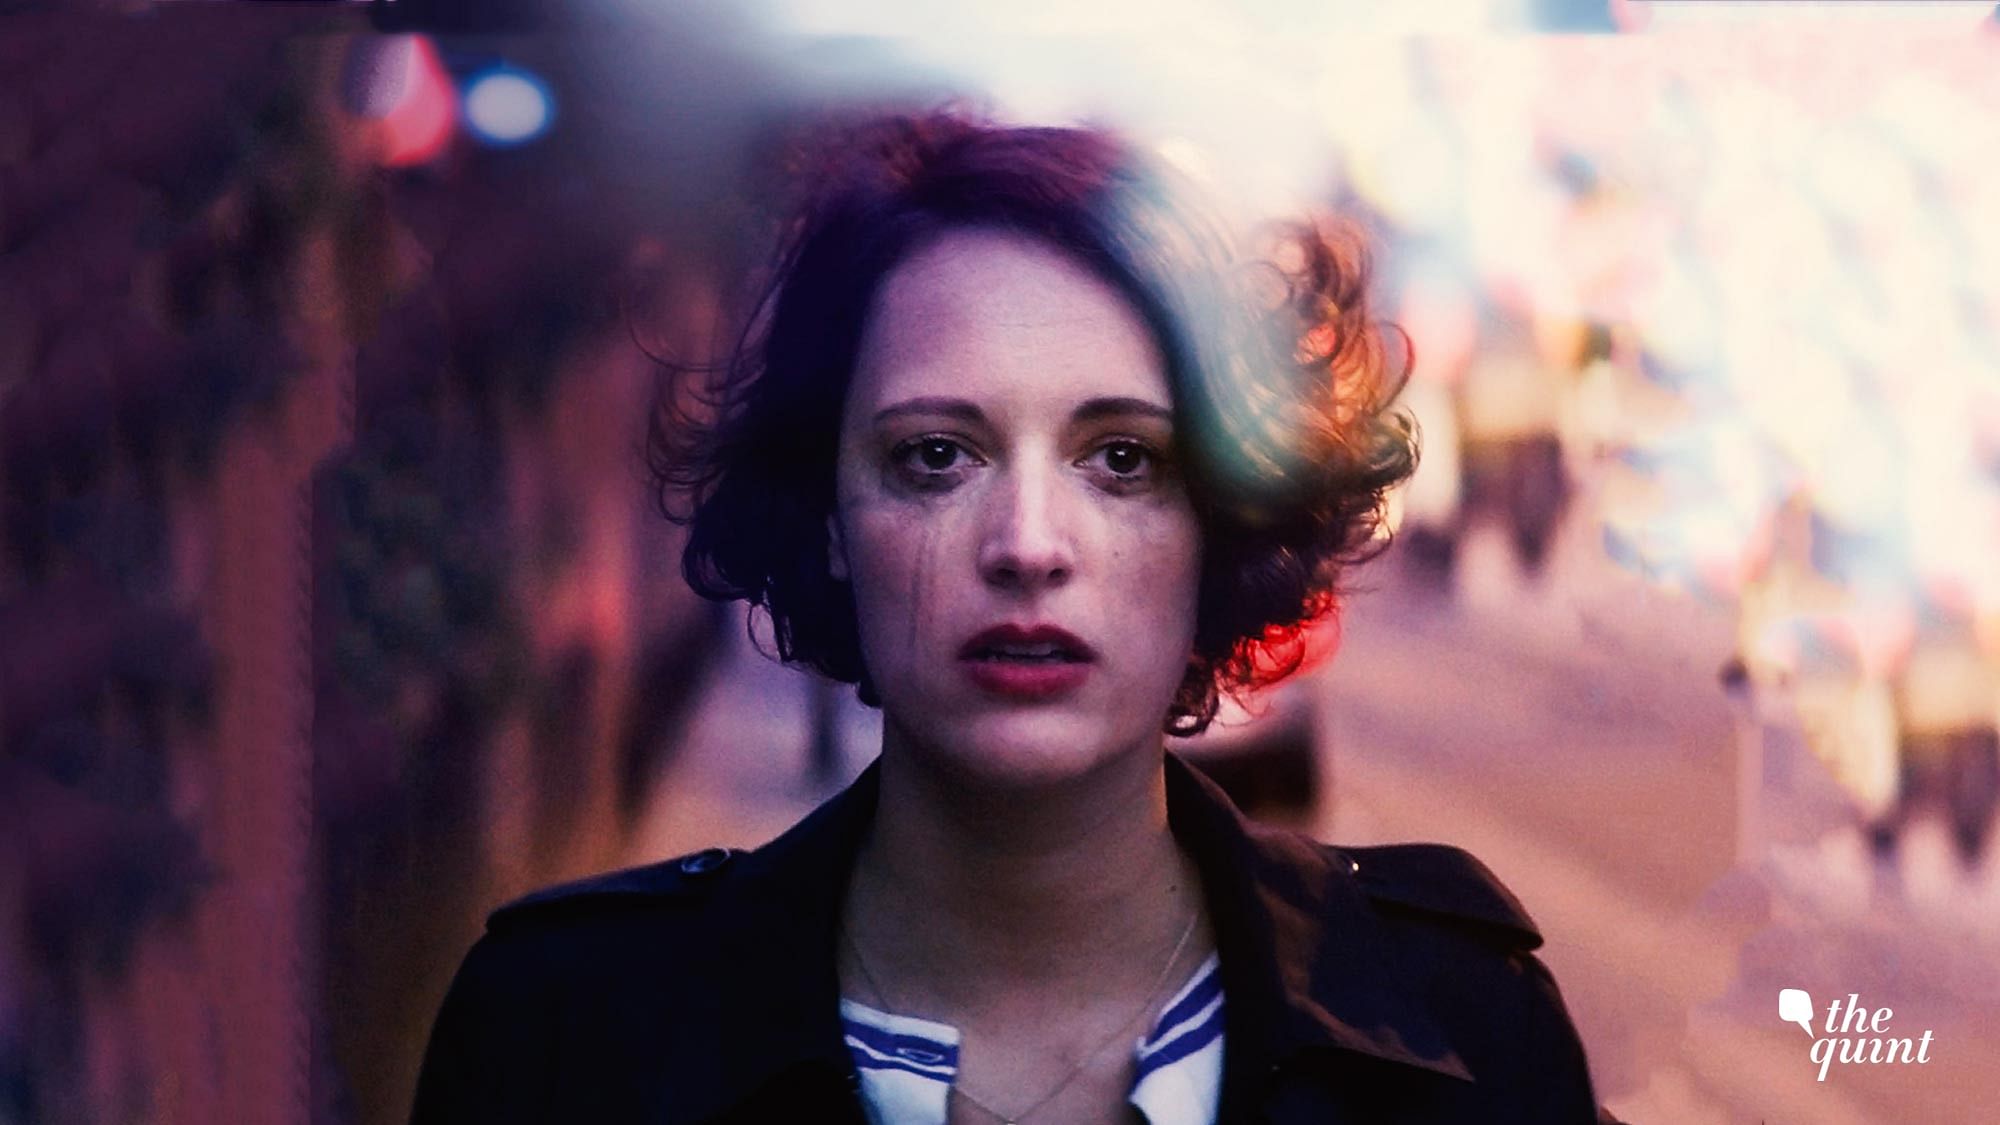 Phoebe Waller-Bridge’s <i>Fleabag </i>follows the life of a 30-something woman in London.